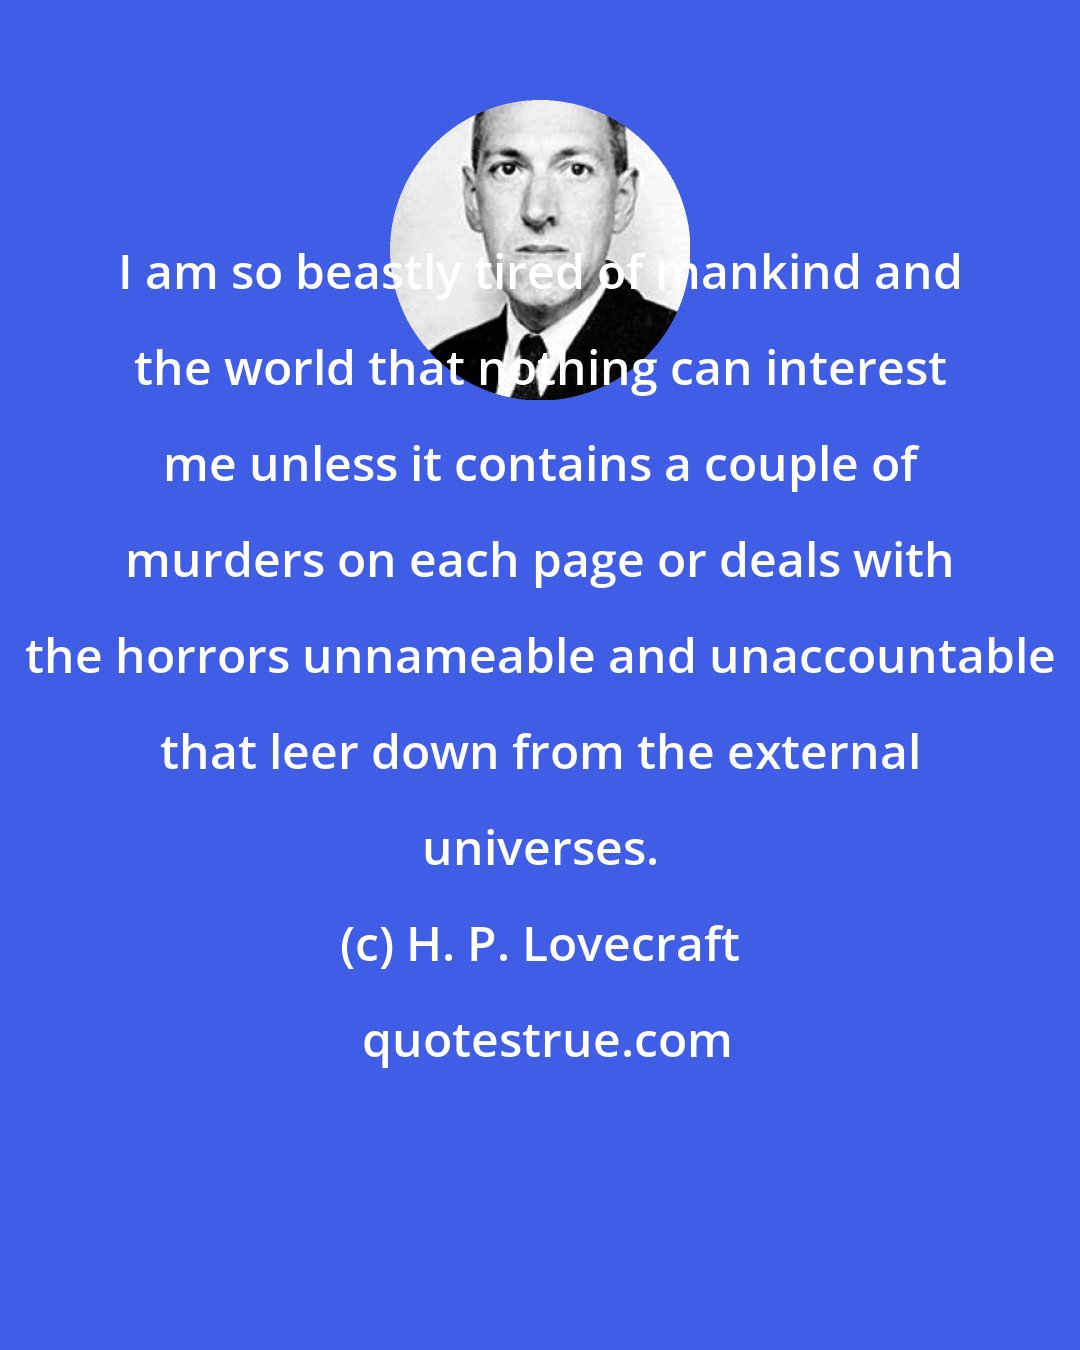 H. P. Lovecraft: I am so beastly tired of mankind and the world that nothing can interest me unless it contains a couple of murders on each page or deals with the horrors unnameable and unaccountable that leer down from the external universes.